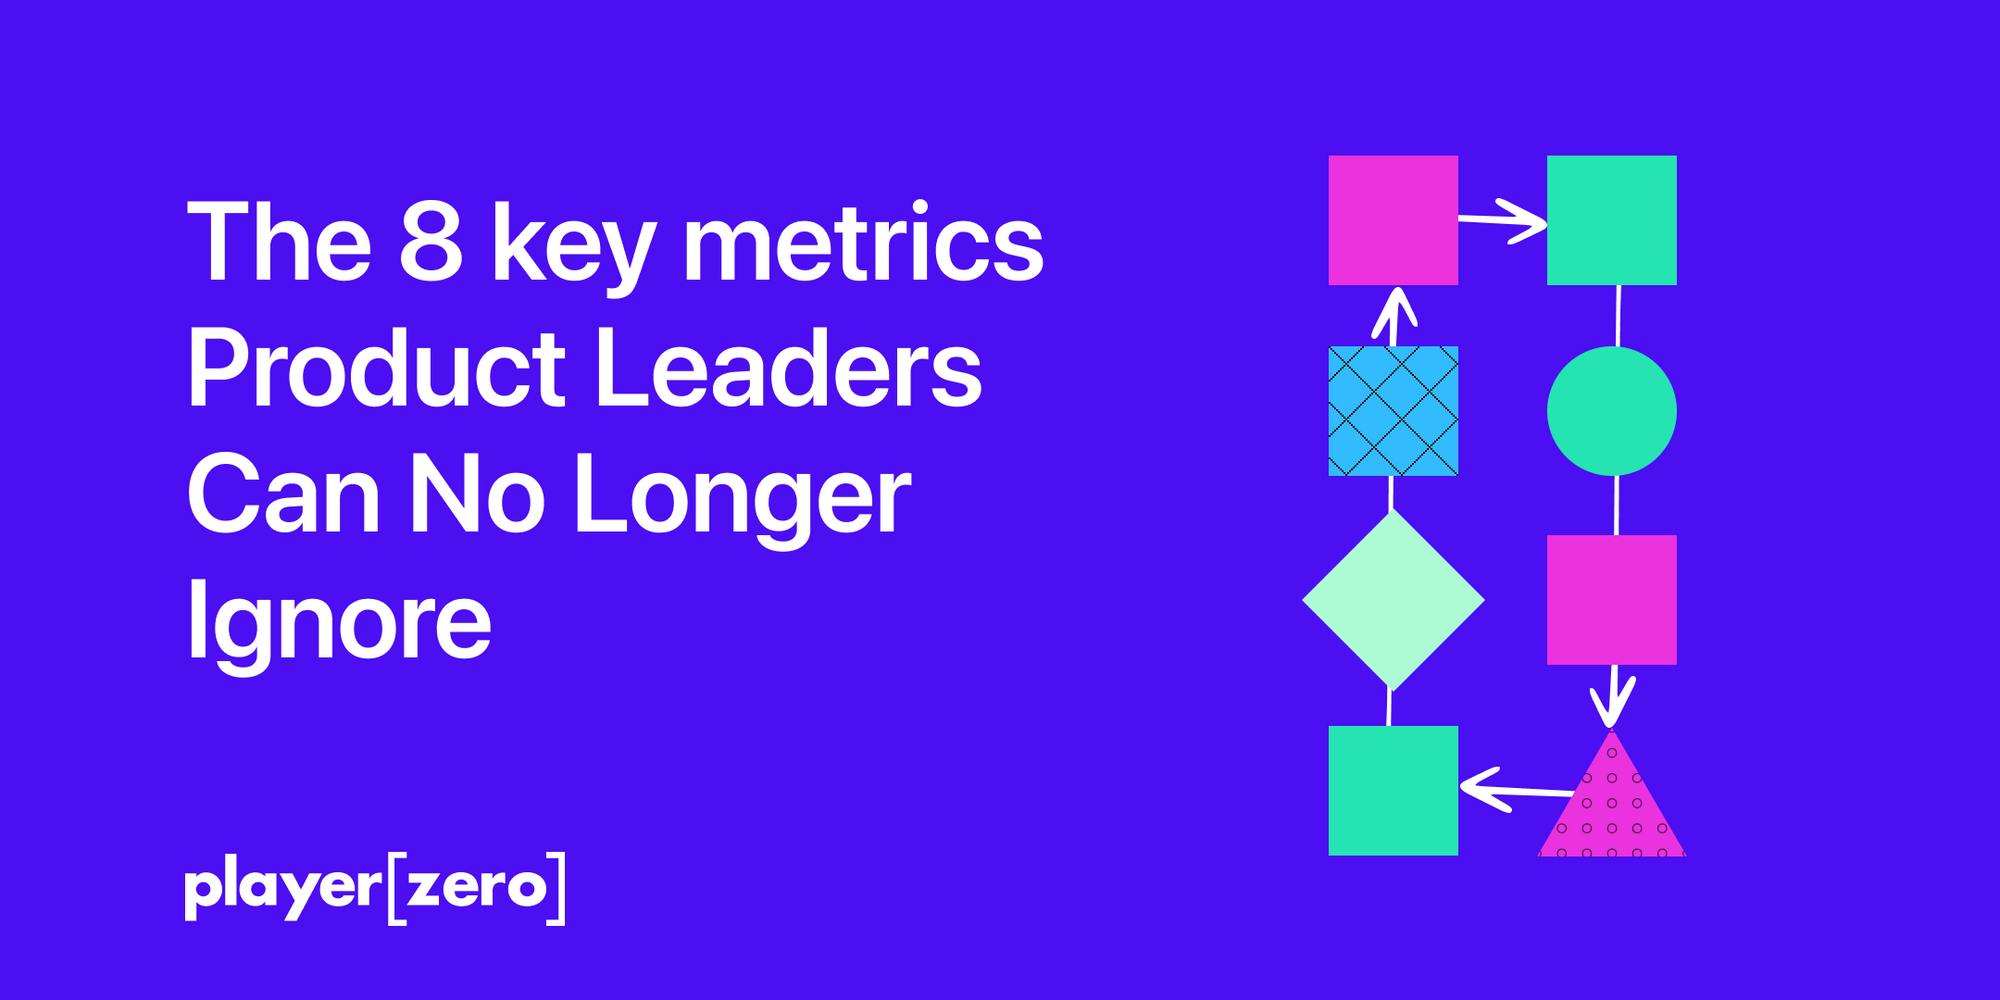 Cover Image for The 8 key metrics product leaders can no longer ignore